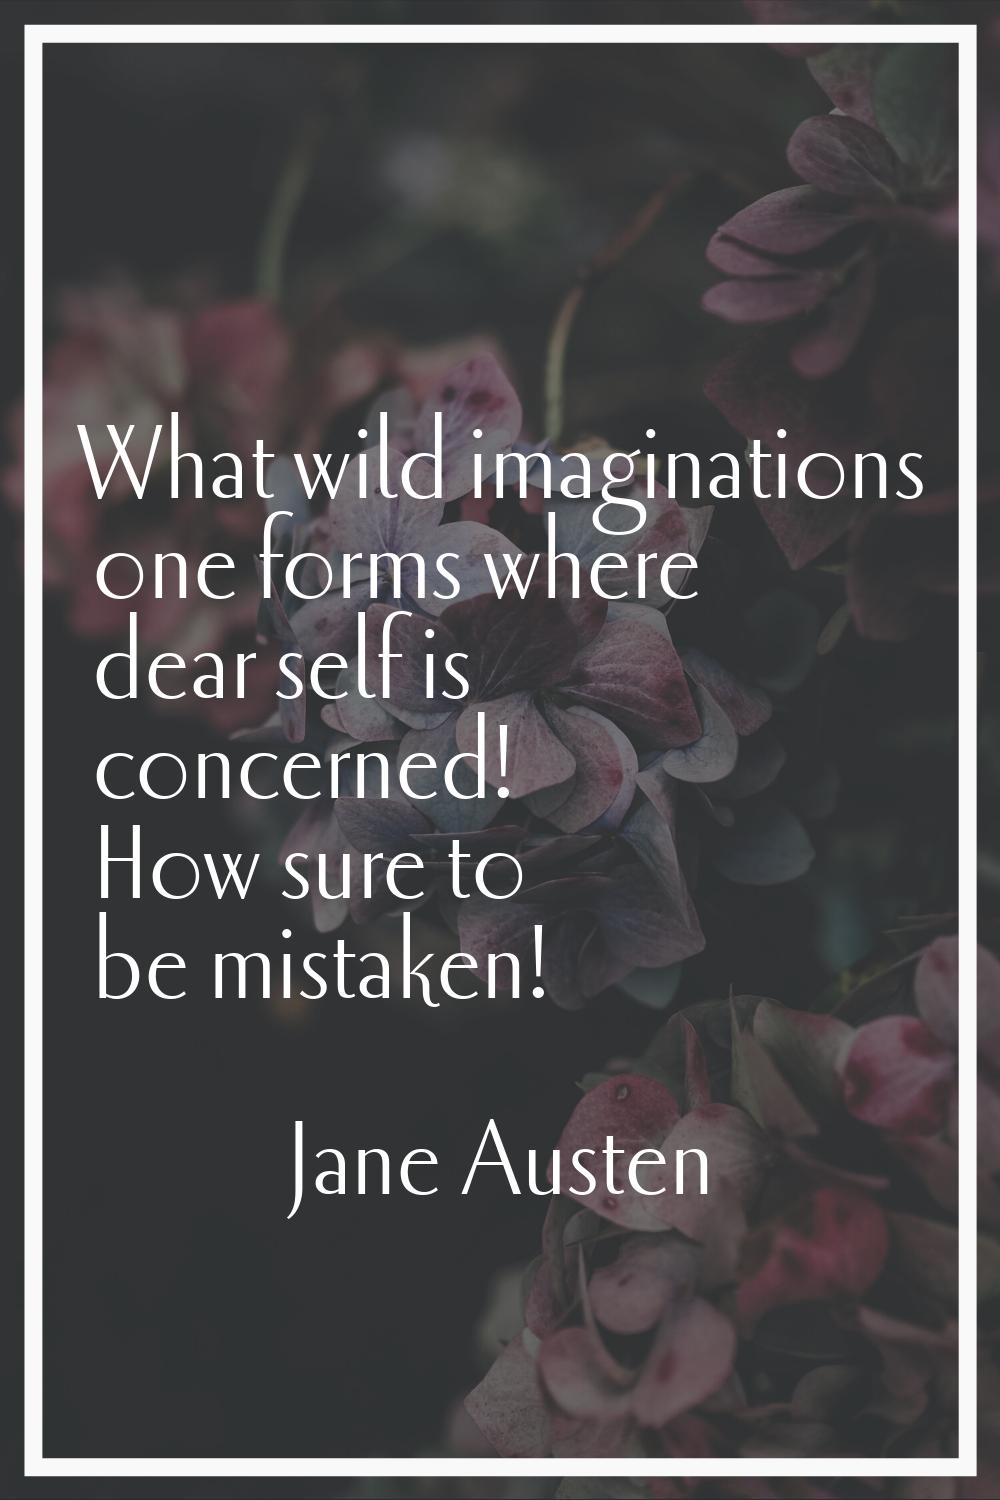 What wild imaginations one forms where dear self is concerned! How sure to be mistaken!